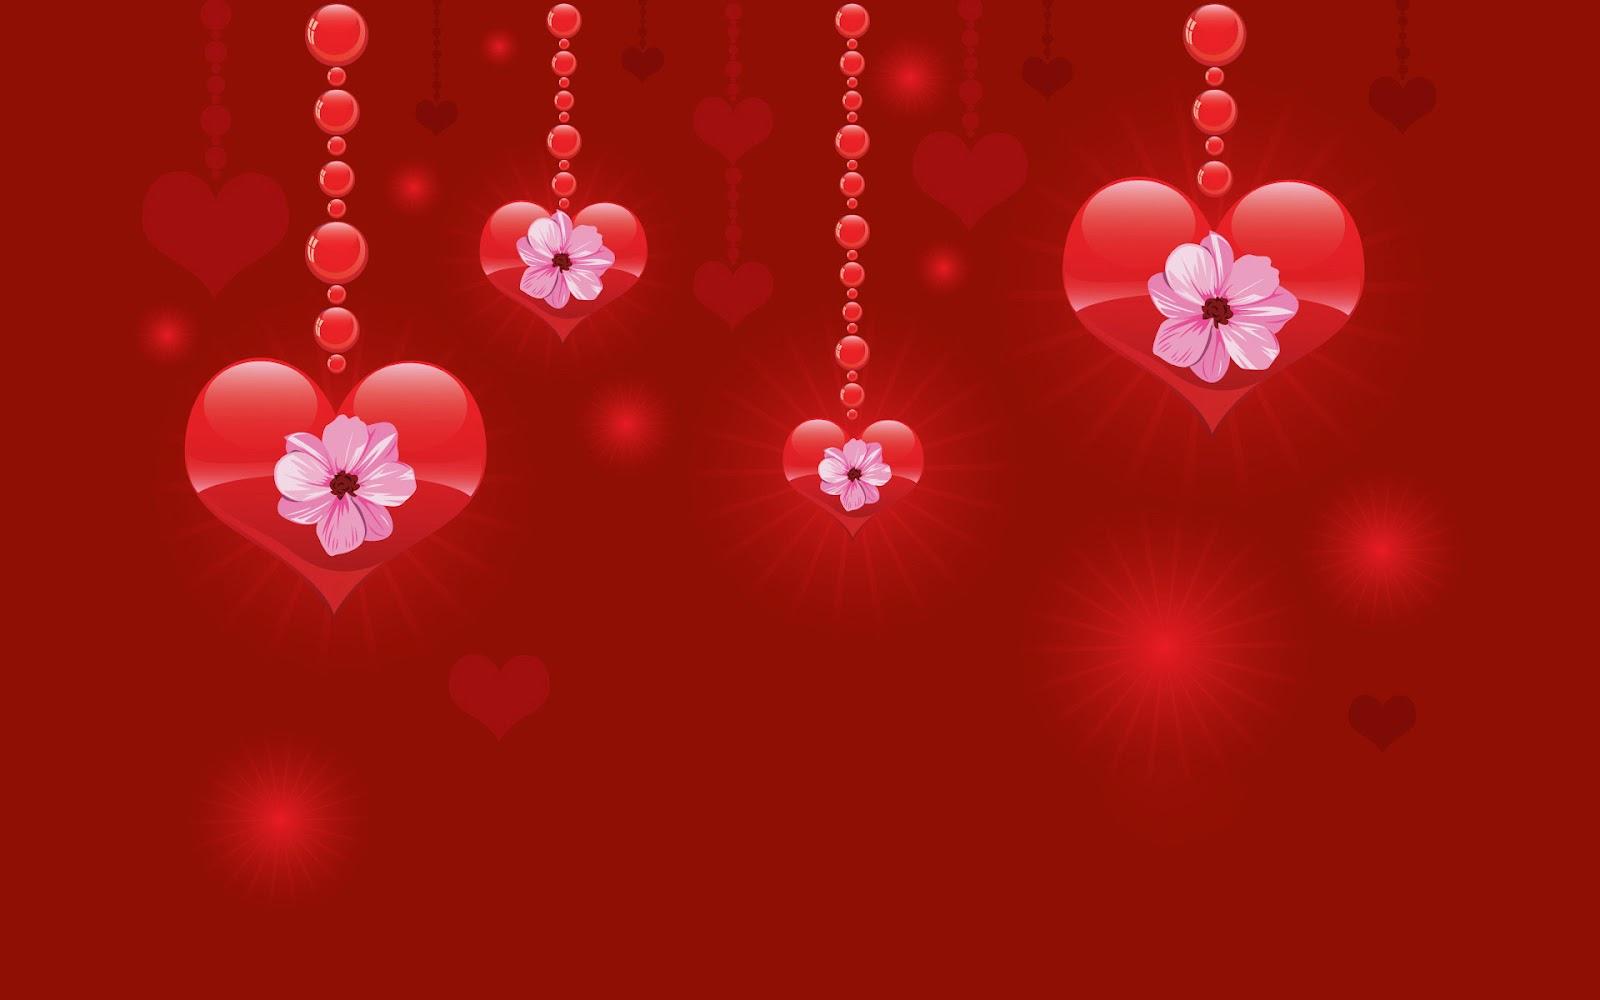 Valentines Day Sale Background with Heart Shaped Balloons. Vector  Illustration.Wallpaper Stock Vector - Illustration of promo, marketing:  107727761